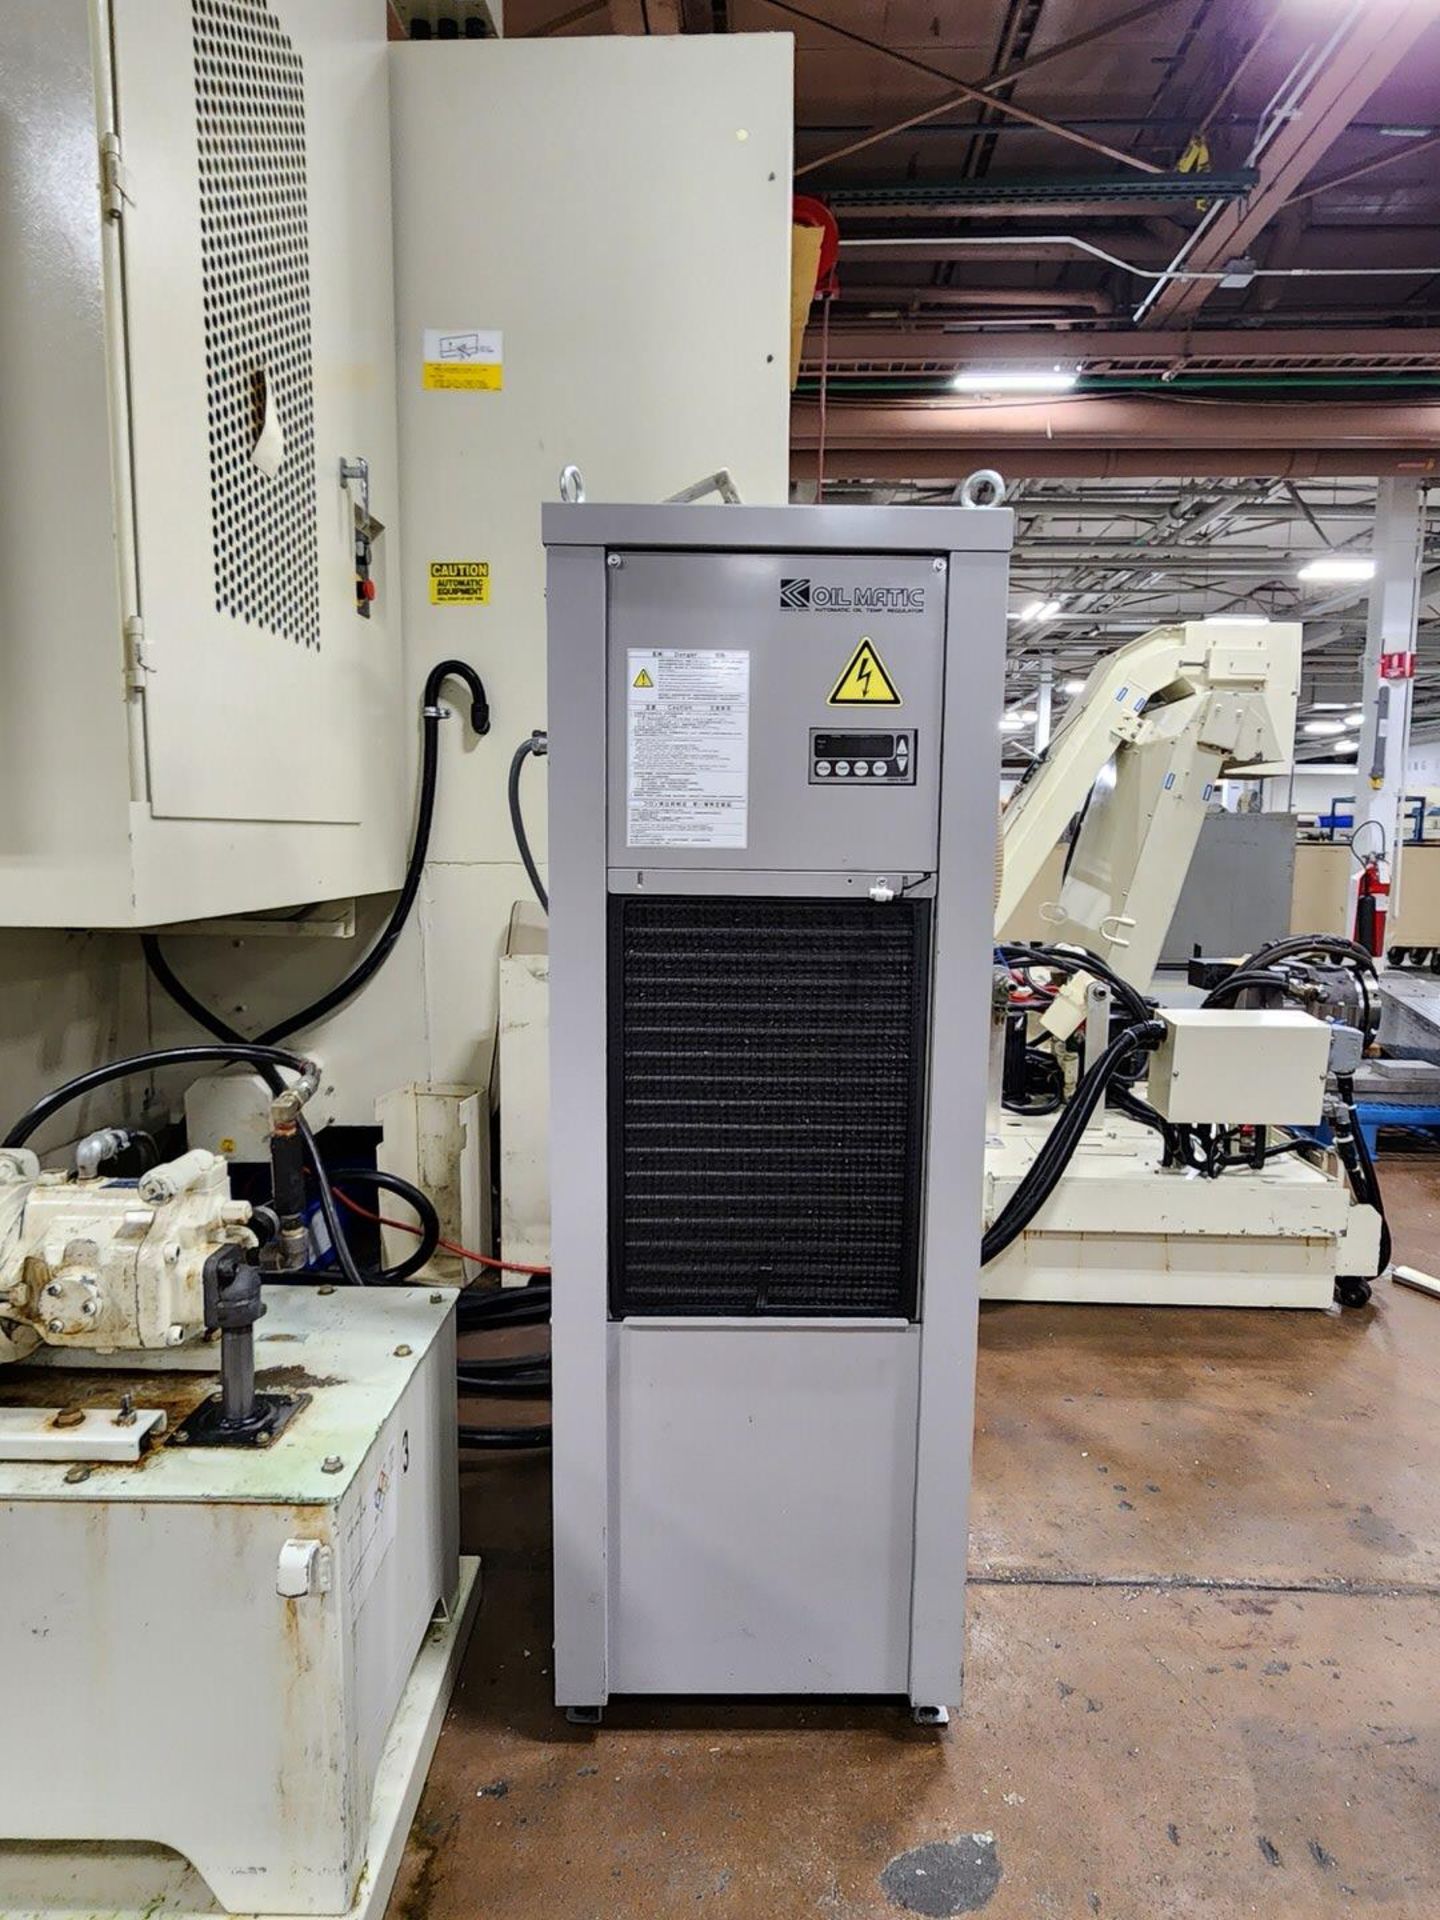 2008 Kitamura 7HiF Vertical Machining Center W/ Fanuc Series 16i-MB; 30,000 Spindle Speed; - Image 13 of 23